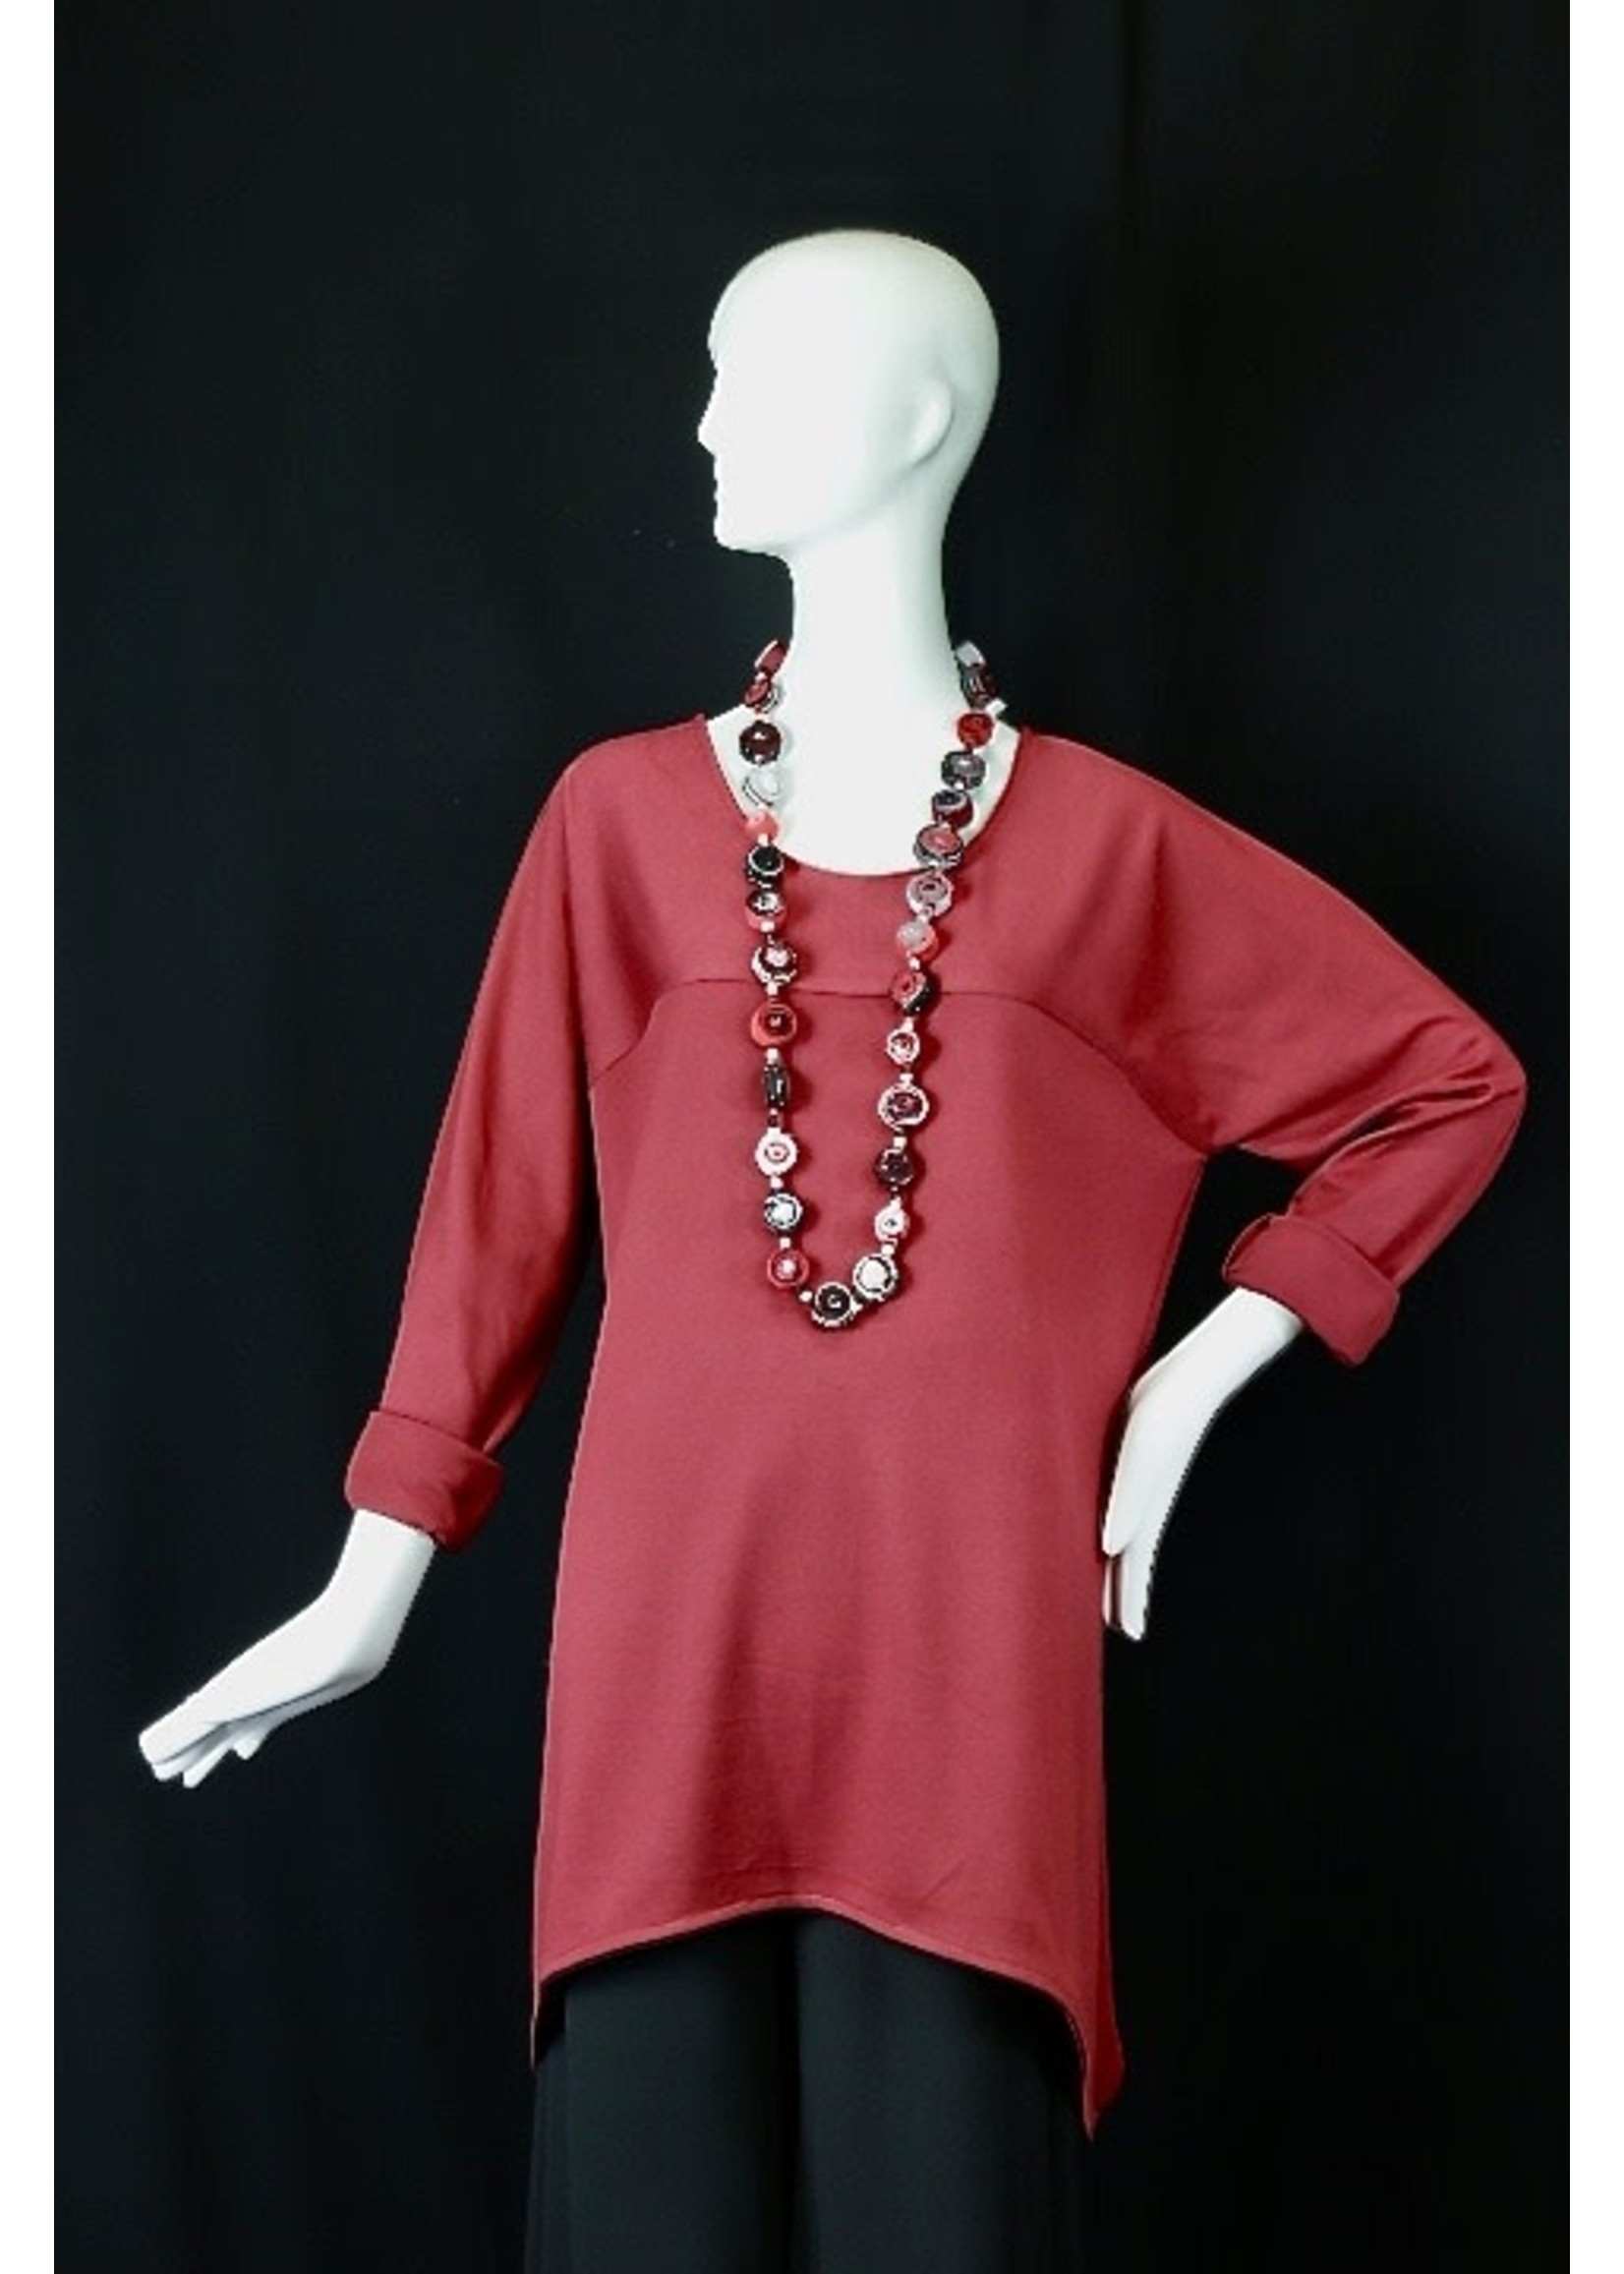 Tunic T2496-ST237-M-Cranberry knit tunic w/side points